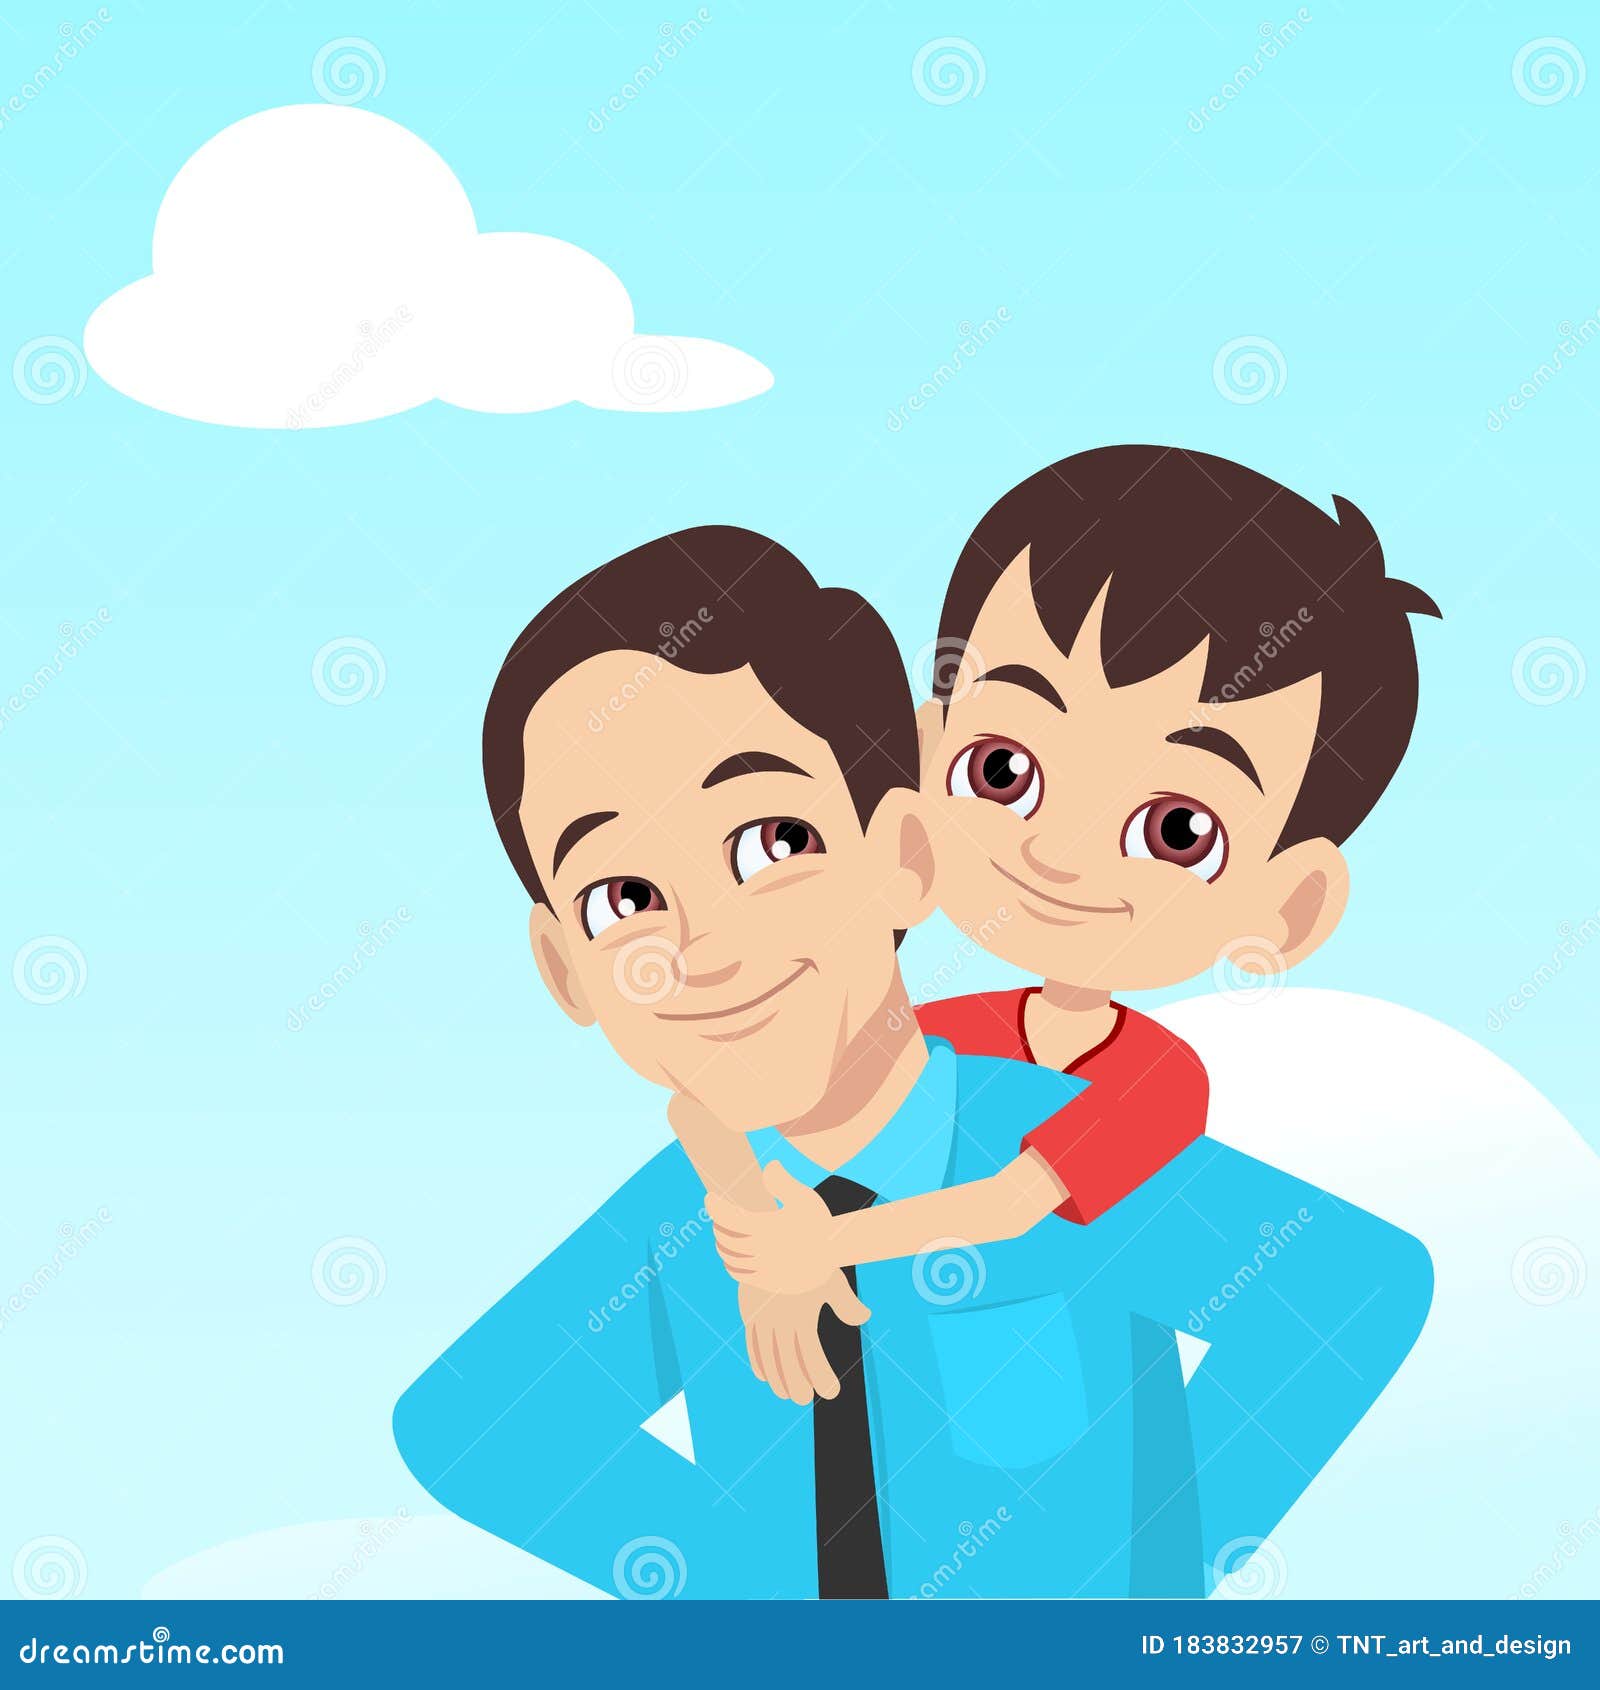 A Son Hugging His Father Shoulder from Behind Stock Vector - Illustration  of family, hugging: 183832957